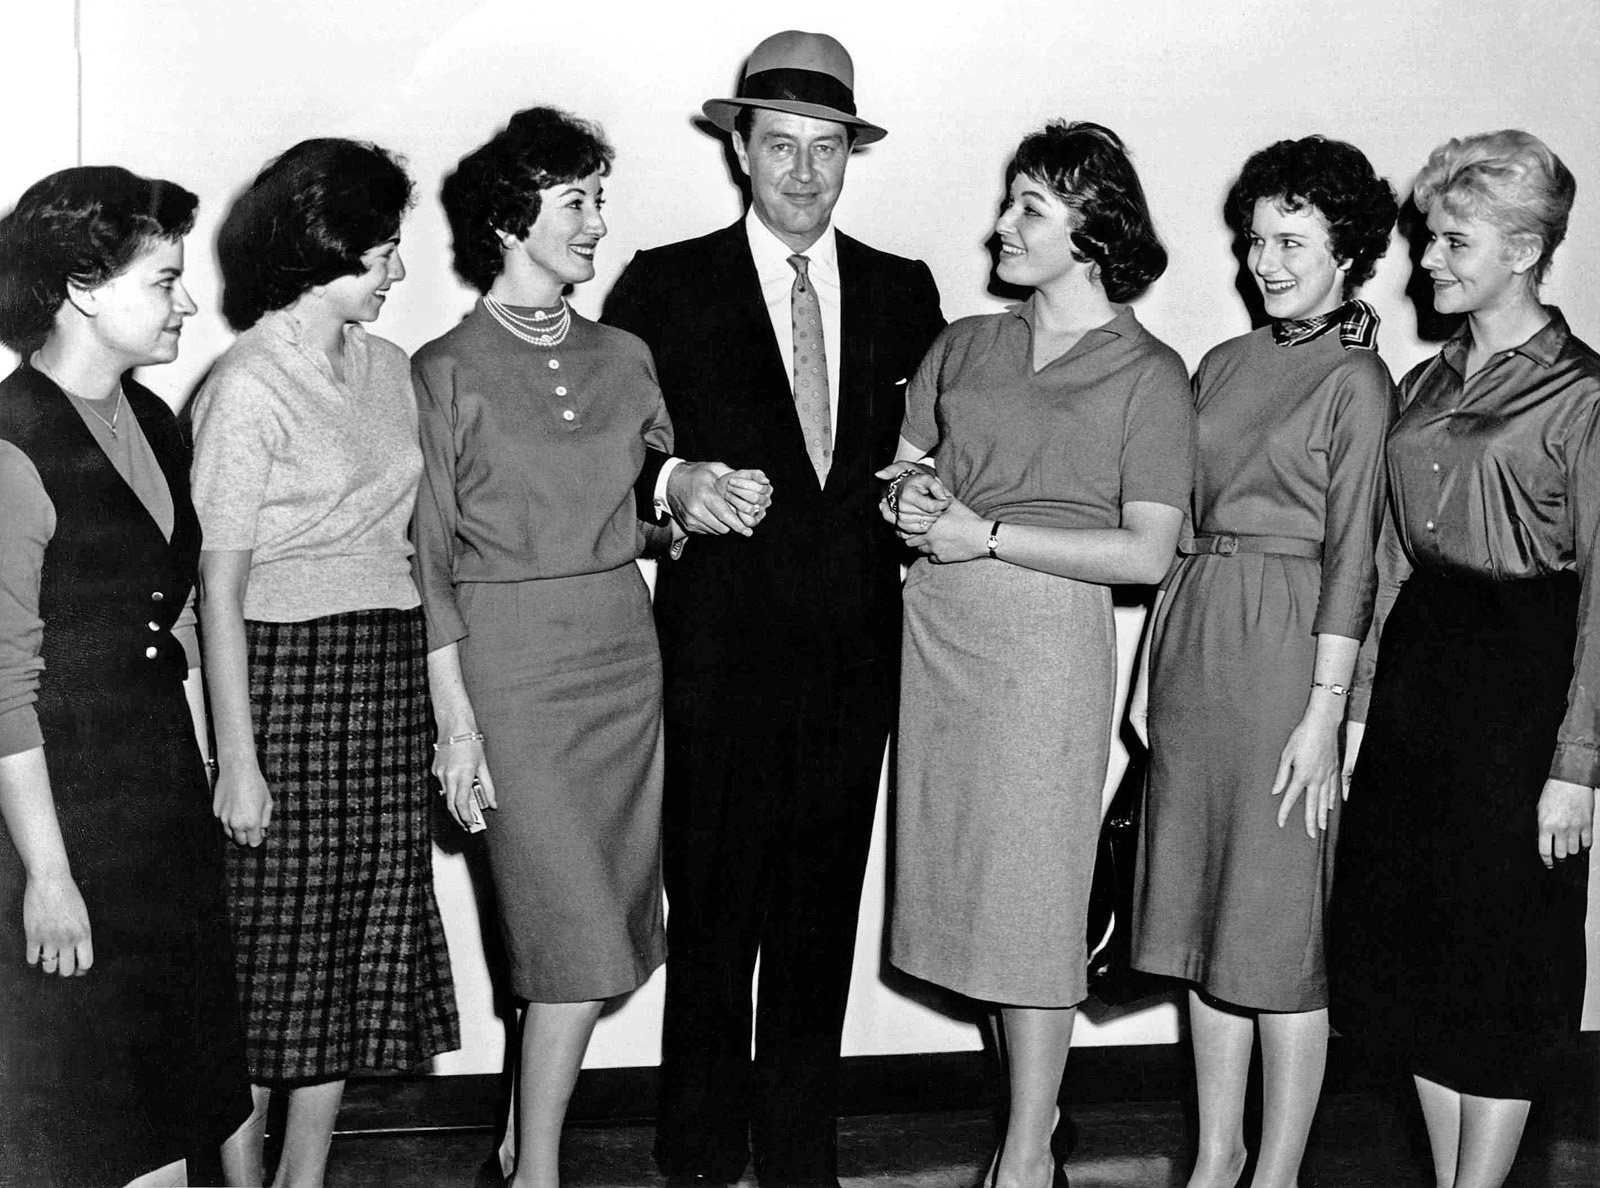 My mother, Louise Lurie Hurvitz, second from left, meeting actor Ray Milland at WBBM-TV in Chicago. She was in charge of publicity for the station and frequently greeted notables who came to the Windy City, including actors Milland, Charlton Heston and, most notably, Senator John F. Kennedy and Vice President Richard M. Nixon, who faced off for their historic 1960 Presidential debate in the station's studios. View full size.